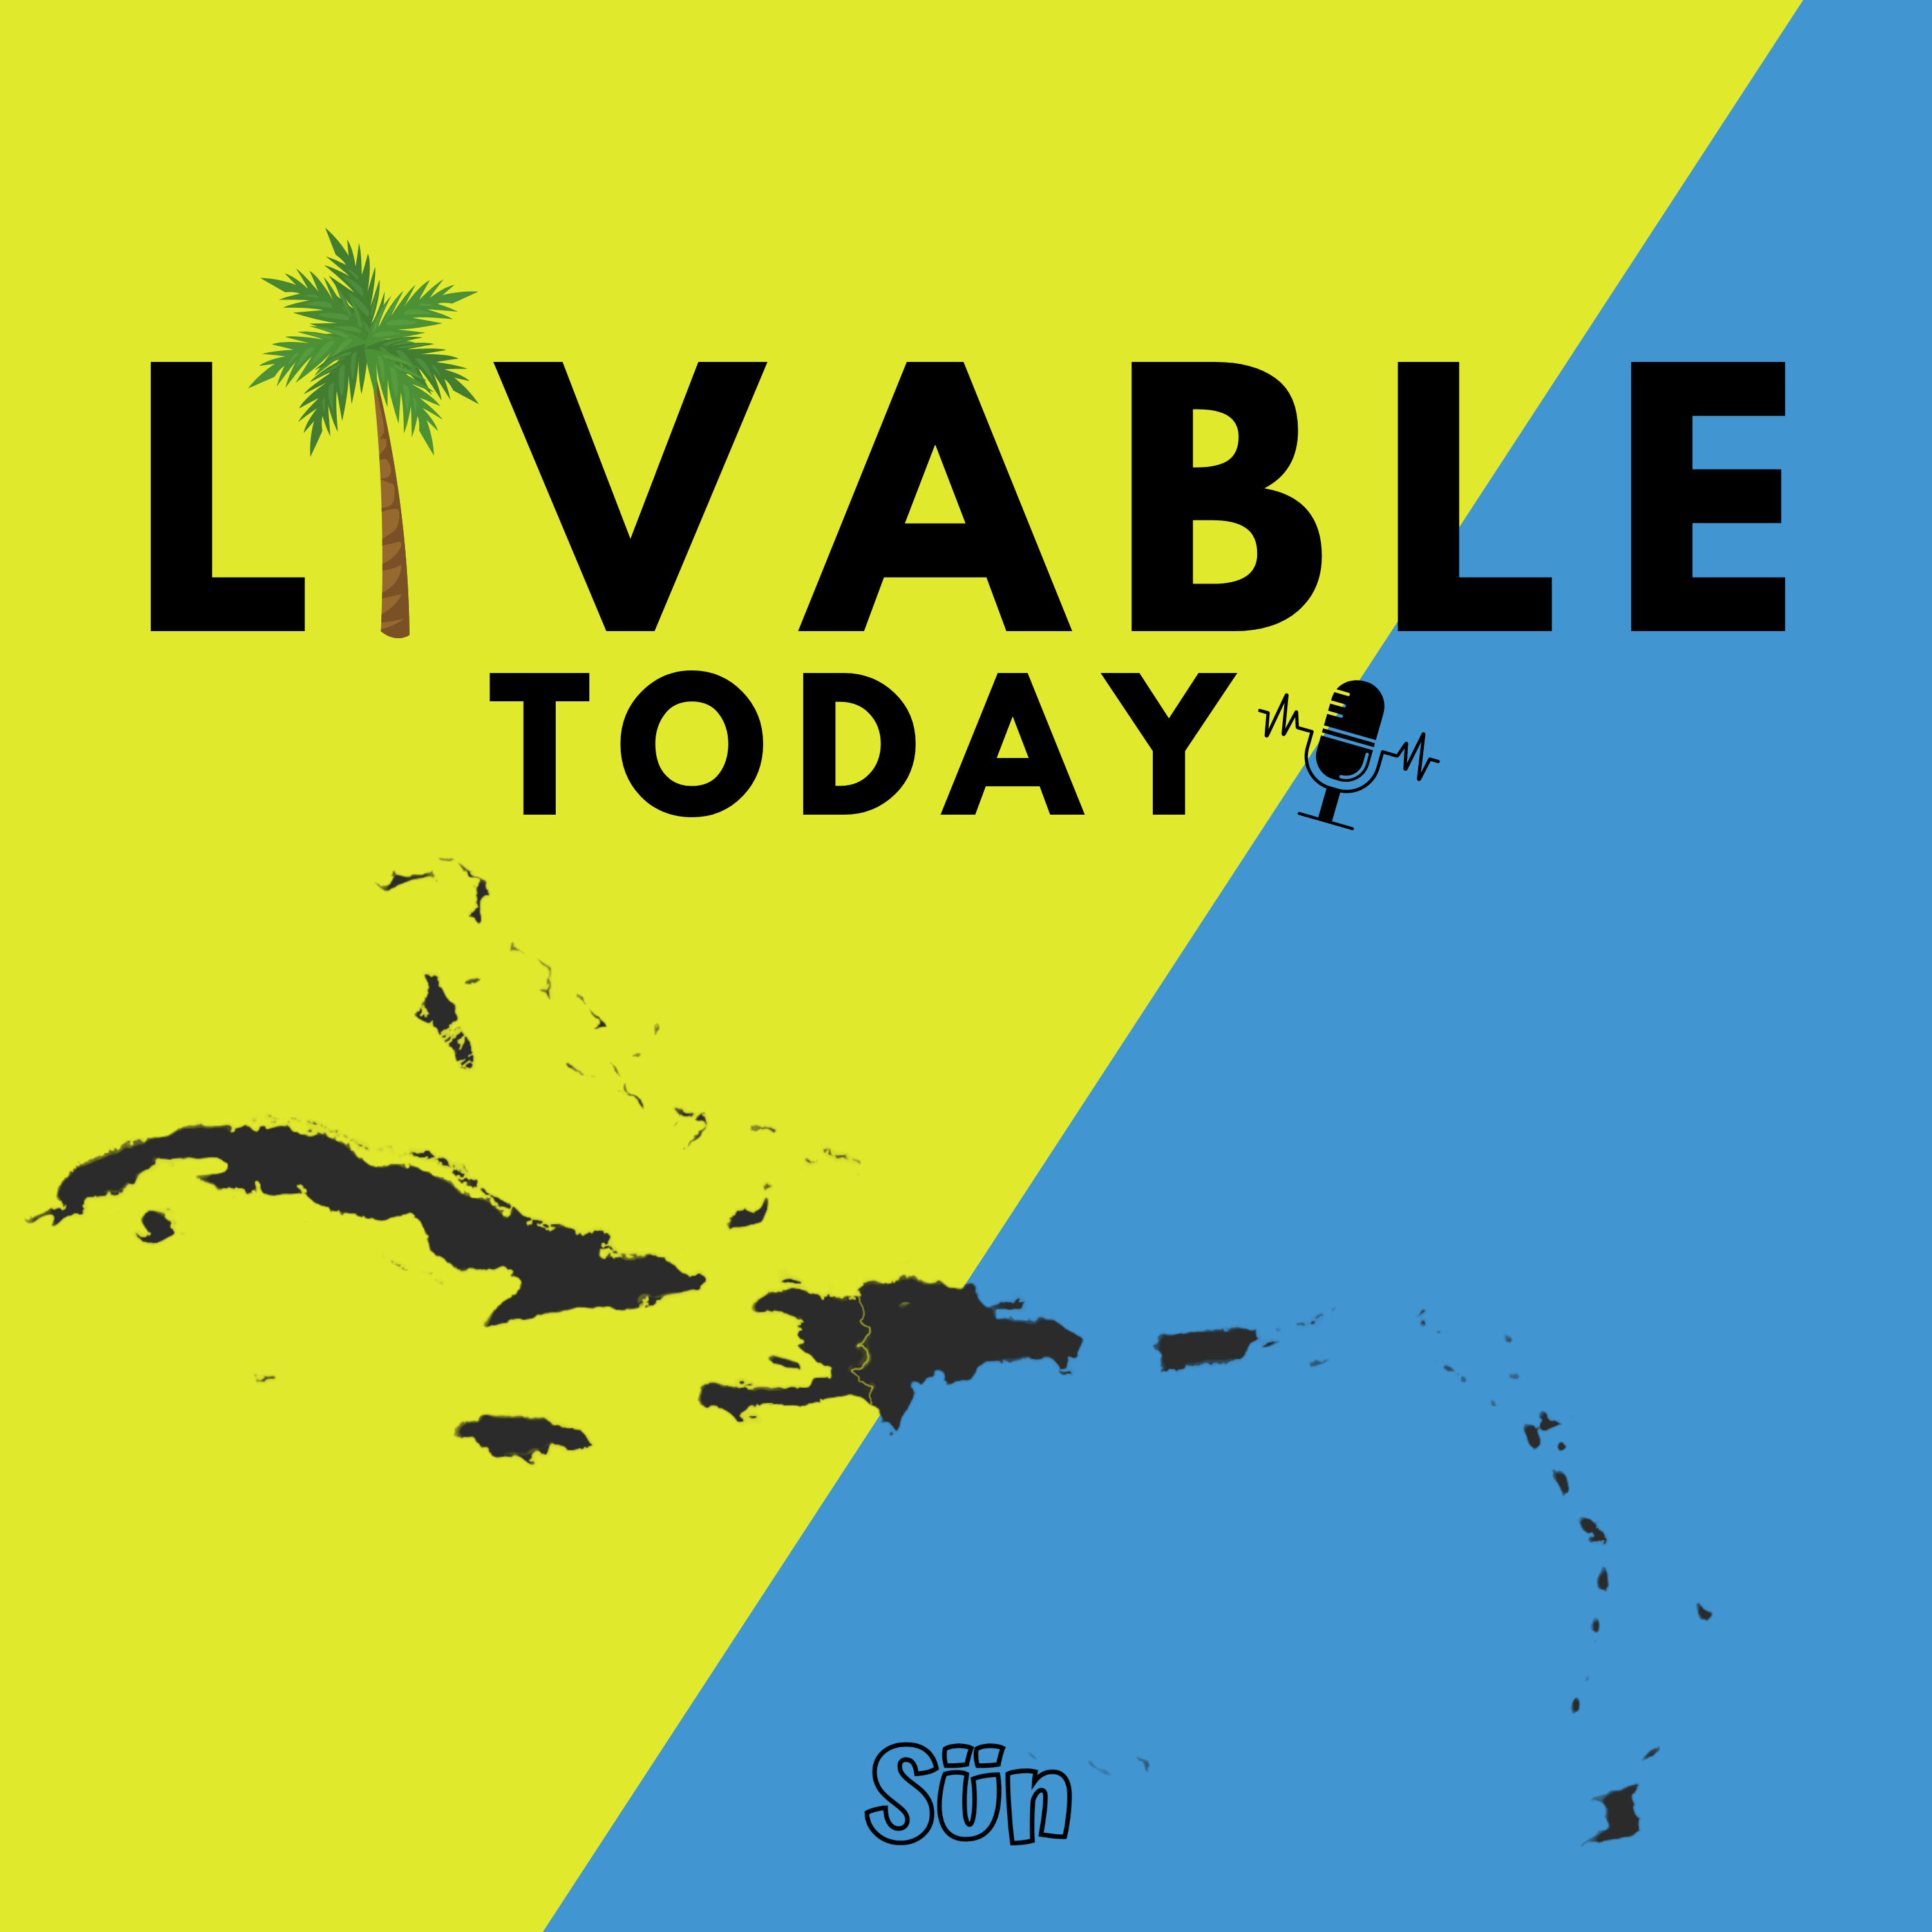 Livable Today!